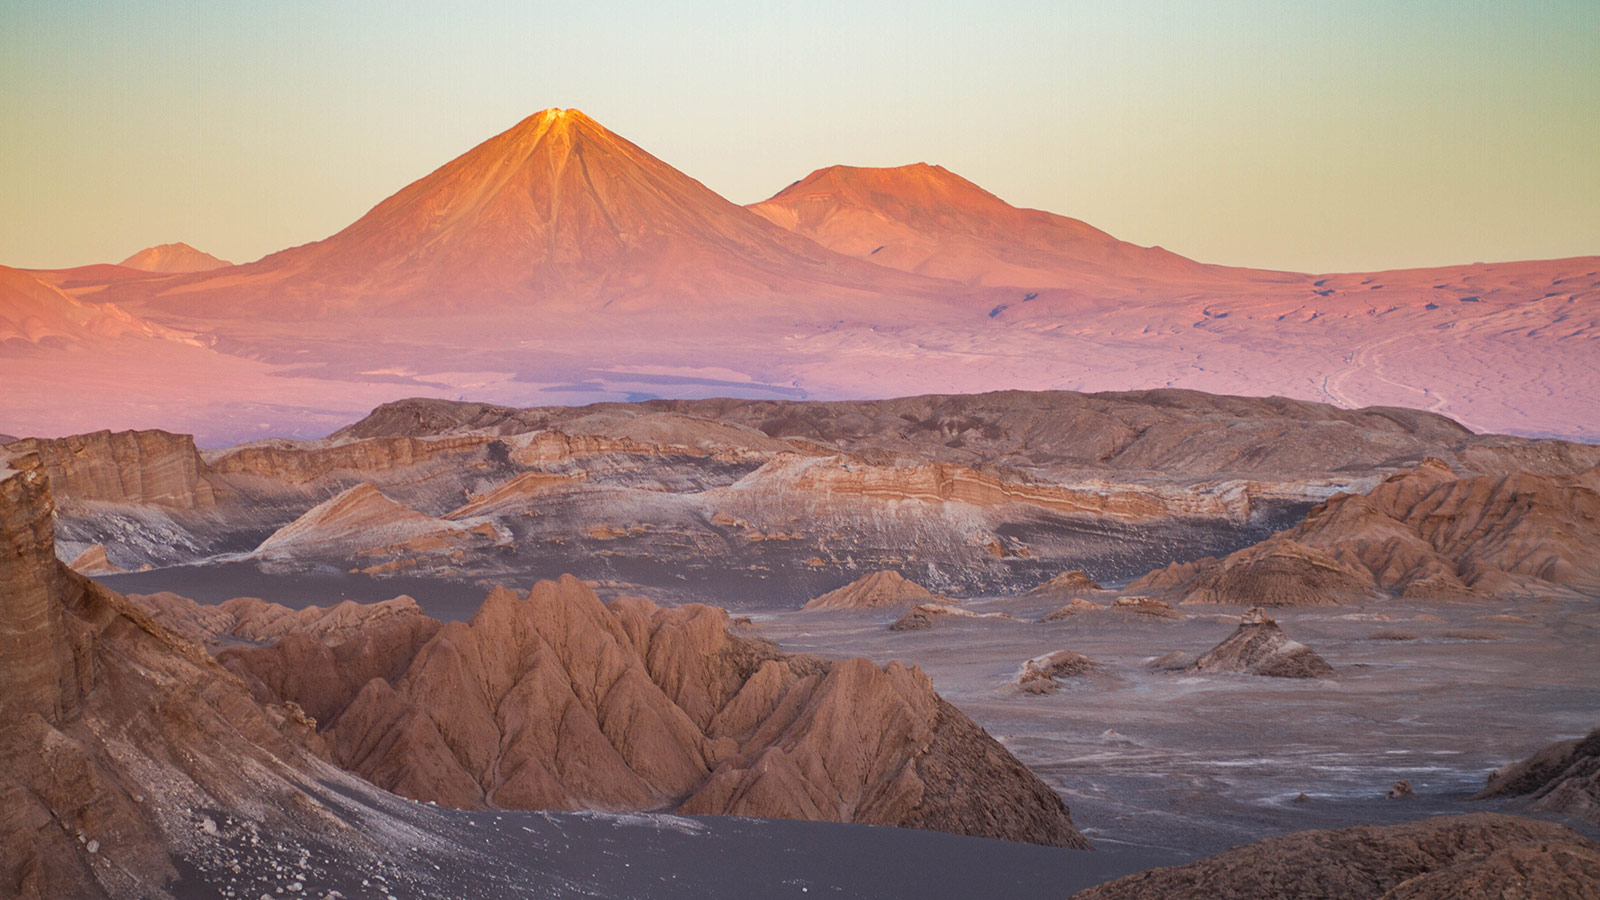 The Andes mountain act as a backdrop to the alien landscape of the Valle de la Luna in Chile